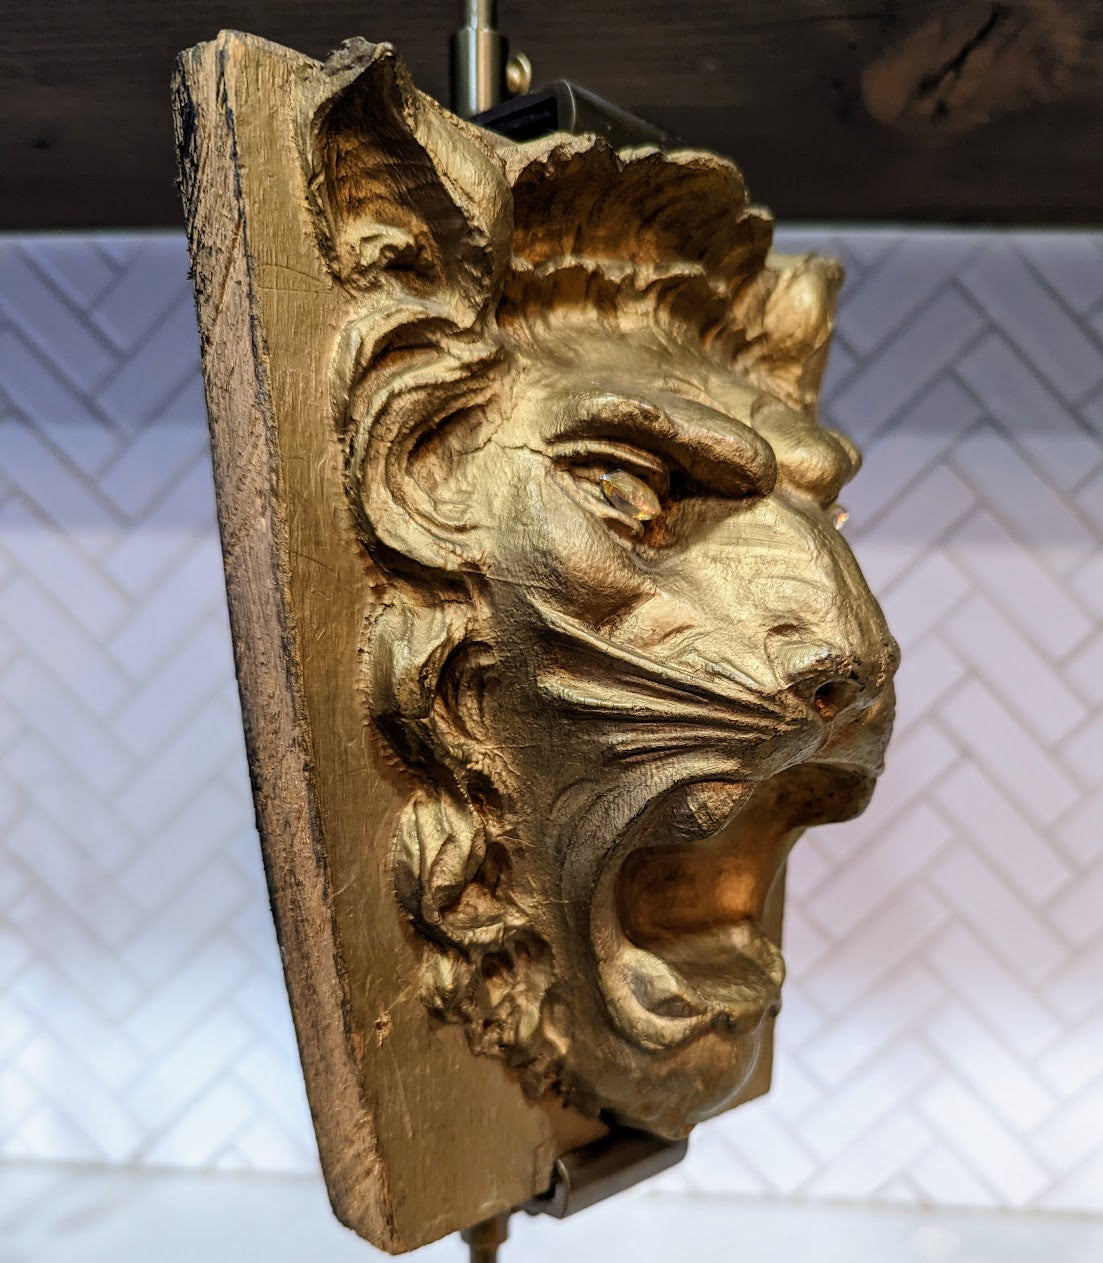 Antique Golden Lion Keystone Sculpture with Opal Eyes – Traveling Man Treasures